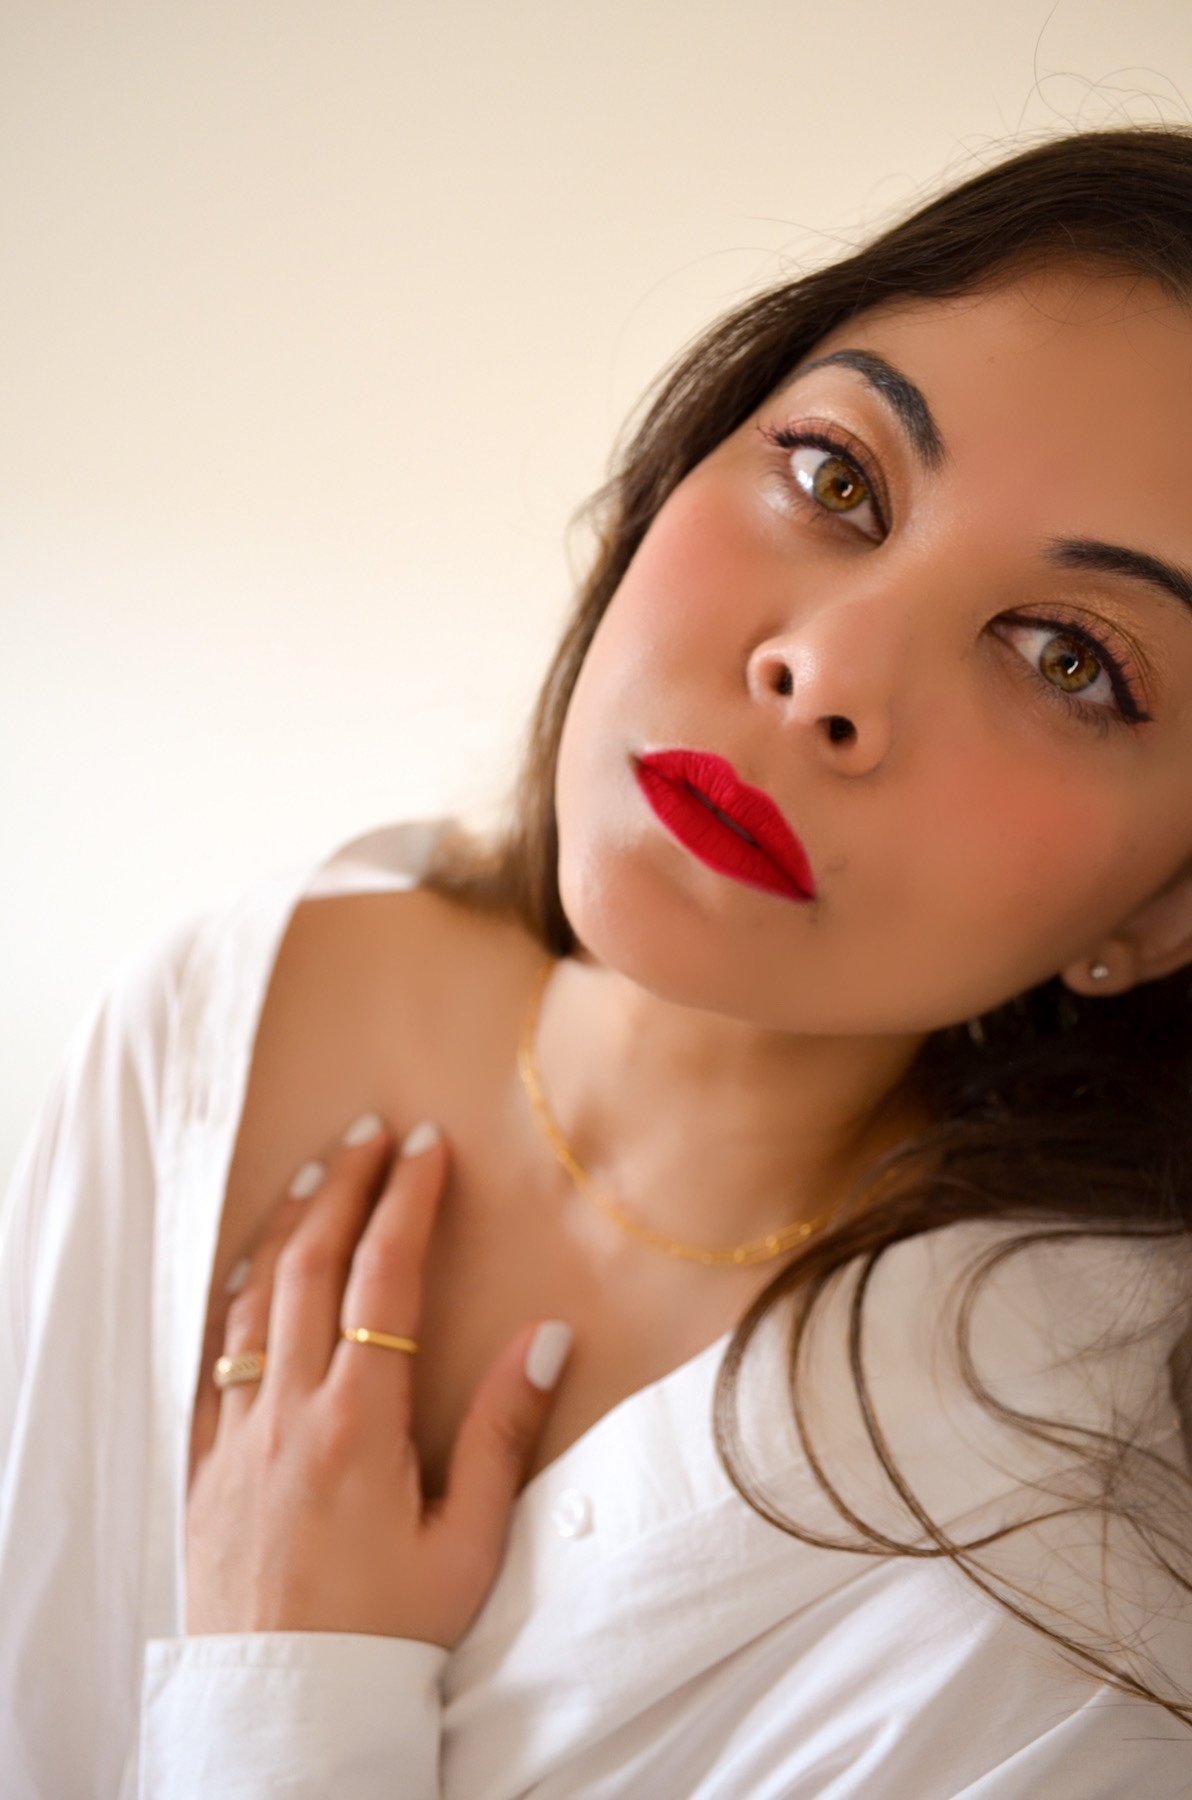 Monica Vinader jewellery on lady with red lips and white shirt. Portrait shot ideas 